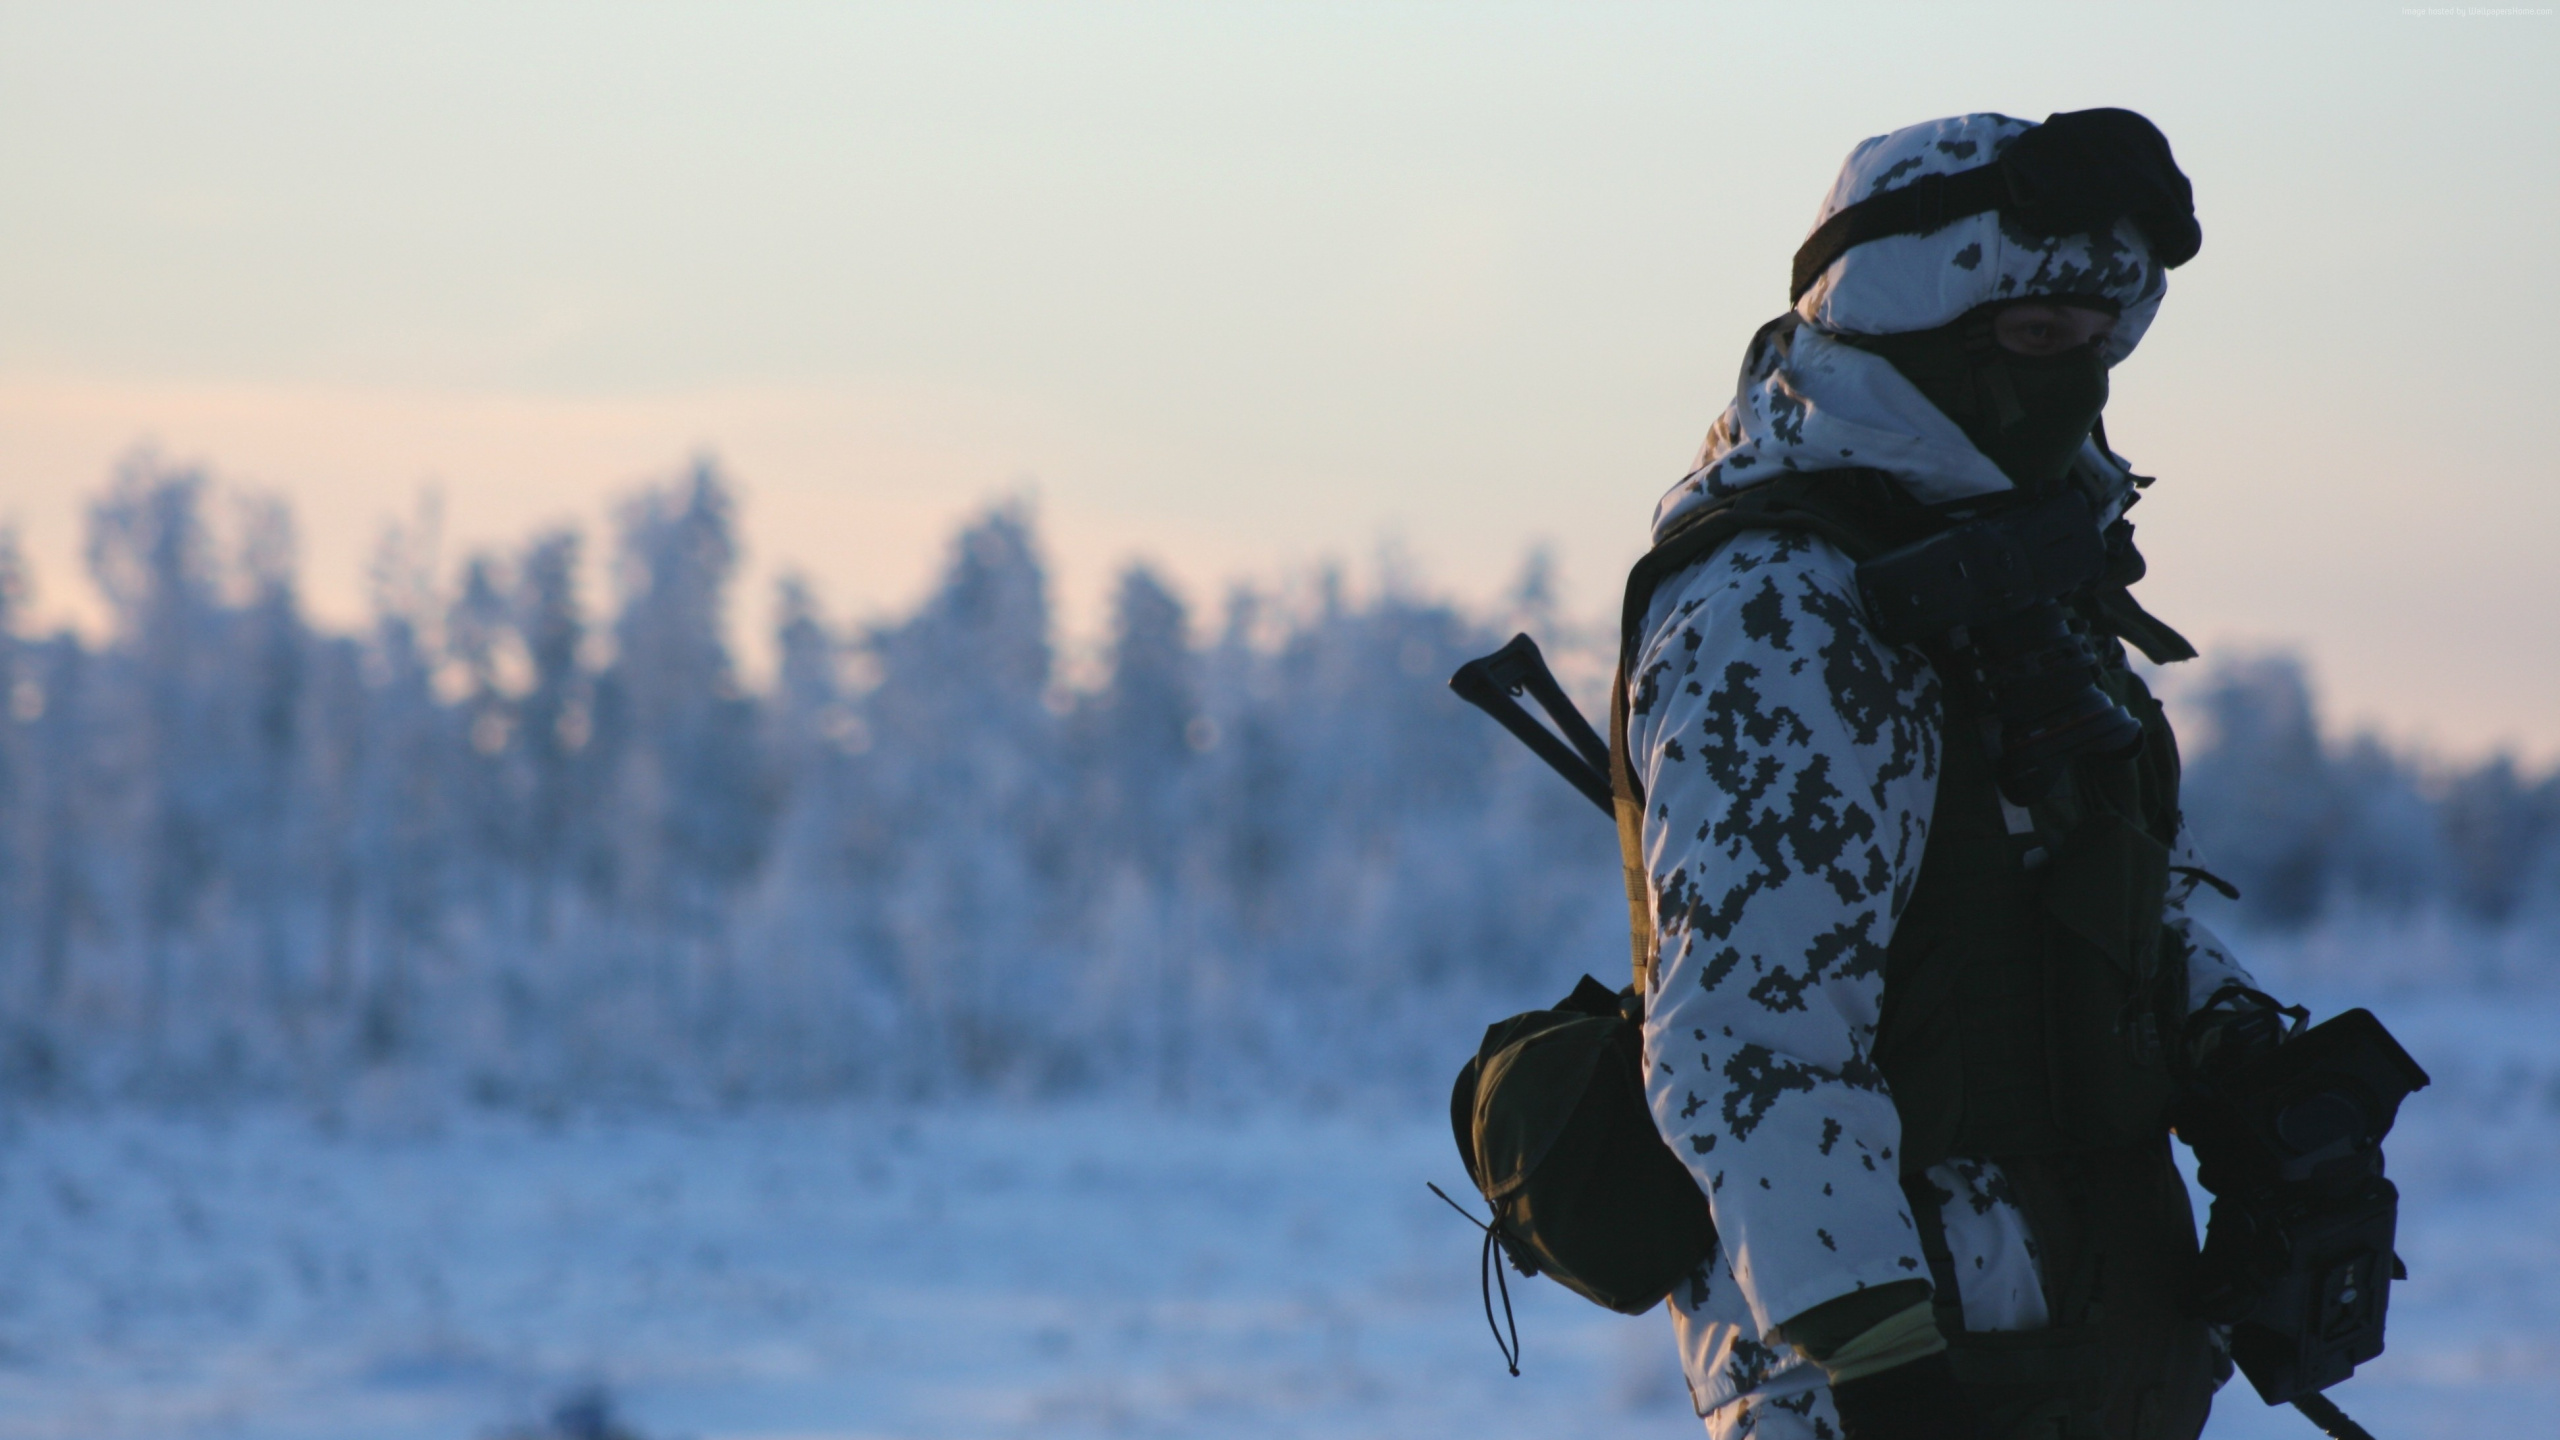 Soldier, Snow, Winter, Freezing, Arctic. Wallpaper in 2560x1440 Resolution